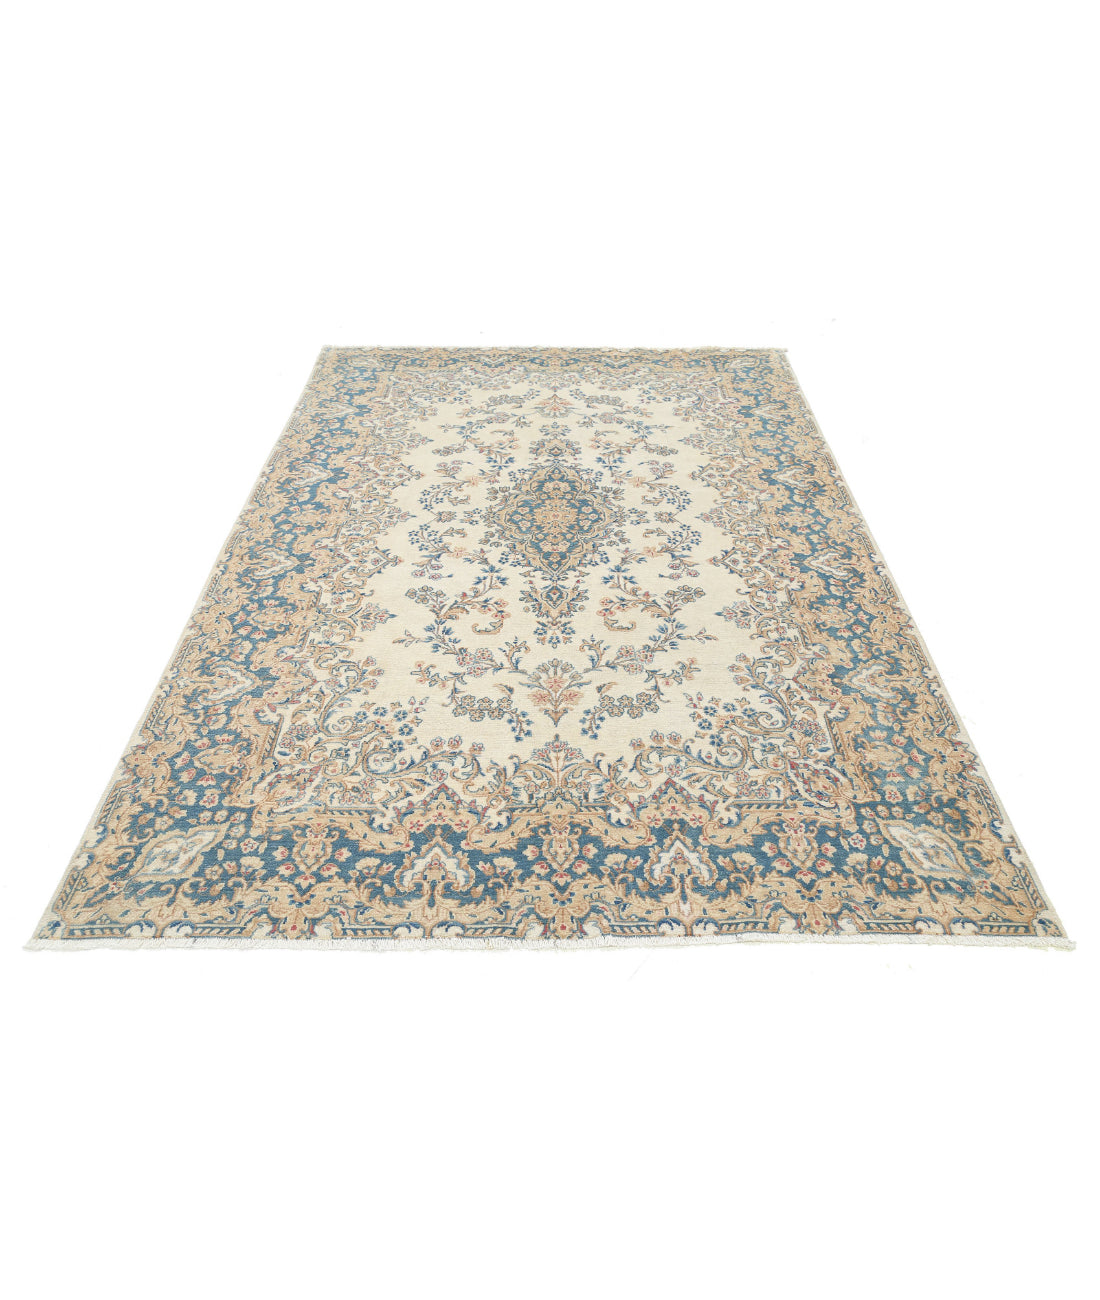 Hand Knotted Vintage Persian Kerman Wool Rug - 5'10'' x 8'6'' 5'10'' x 8'6'' (175 X 255) / Ivory / Blue